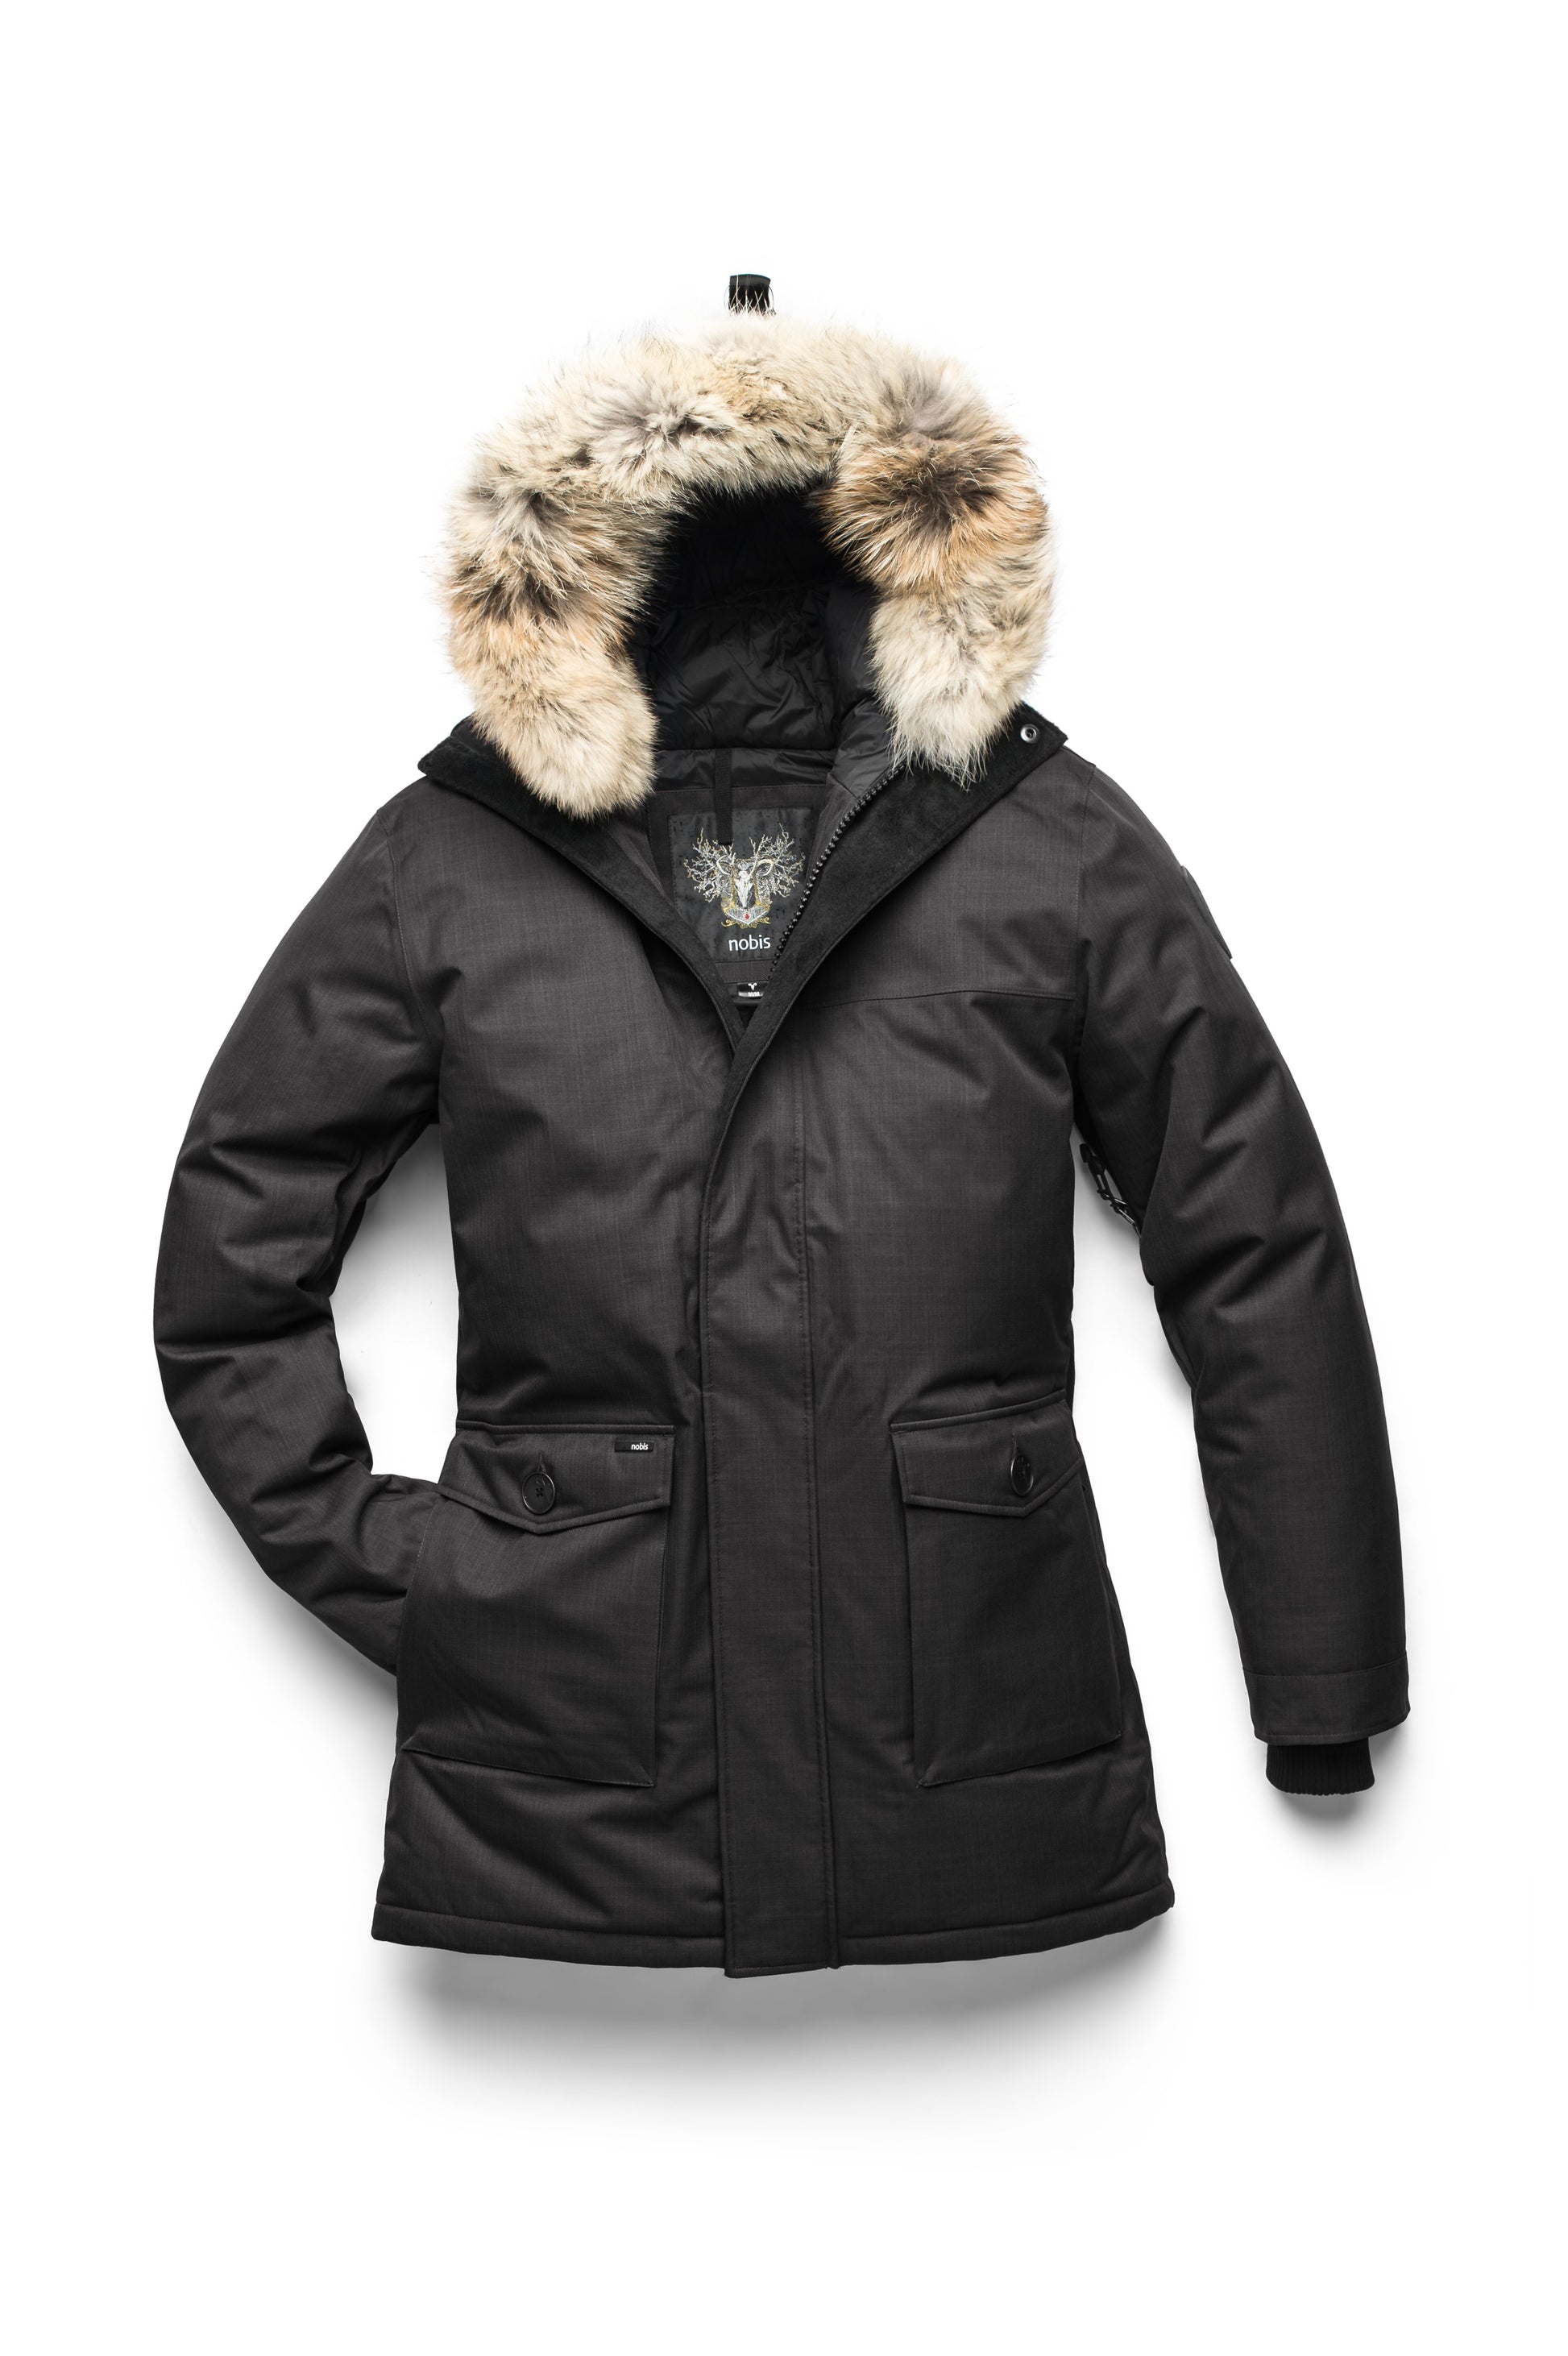 Men's slim fitting waist length parka with removable fur trim on the hood and two waist patch pockets in CH Black